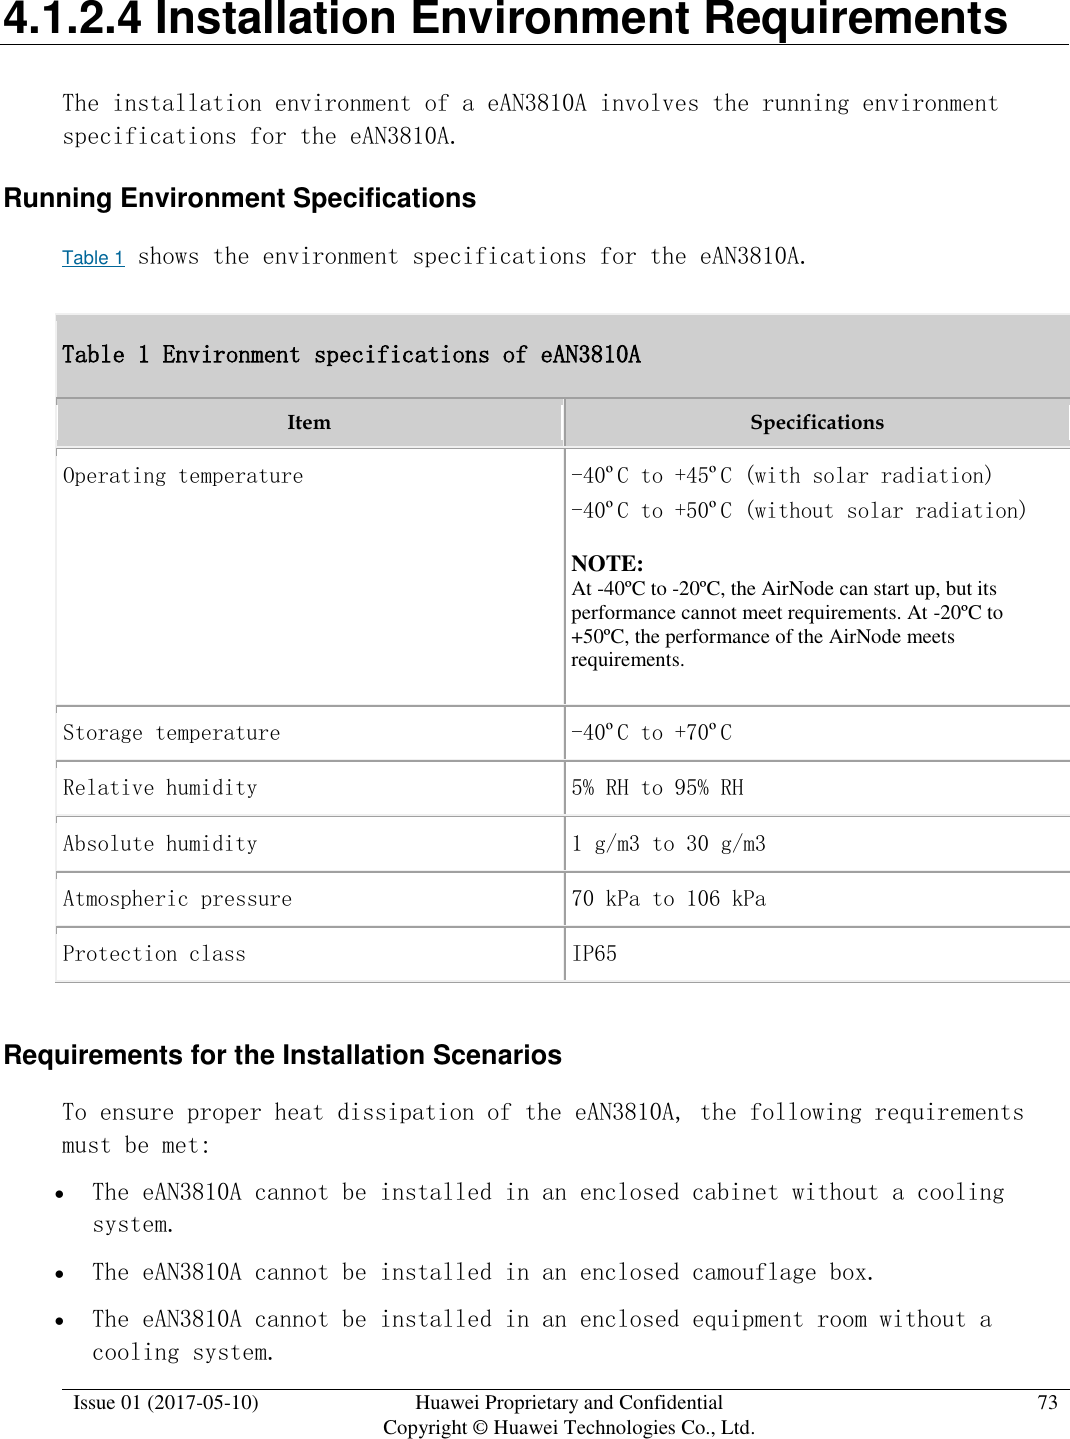  Issue 01 (2017-05-10) Huawei Proprietary and Confidential      Copyright © Huawei Technologies Co., Ltd. 73  4.1.2.4 Installation Environment Requirements The installation environment of a eAN3810A involves the running environment specifications for the eAN3810A. Running Environment Specifications Table 1 shows the environment specifications for the eAN3810A.  Table 1 Environment specifications of eAN3810A Item Specifications Operating temperature -40ºC to +45ºC (with solar radiation) -40ºC to +50ºC (without solar radiation) NOTE:  At -40ºC to -20ºC, the AirNode can start up, but its performance cannot meet requirements. At -20ºC to +50ºC, the performance of the AirNode meets requirements. Storage temperature -40ºC to +70ºC Relative humidity 5% RH to 95% RH Absolute humidity 1 g/m3 to 30 g/m3 Atmospheric pressure 70 kPa to 106 kPa Protection class IP65 Requirements for the Installation Scenarios To ensure proper heat dissipation of the eAN3810A, the following requirements must be met:   The eAN3810A cannot be installed in an enclosed cabinet without a cooling system.  The eAN3810A cannot be installed in an enclosed camouflage box.  The eAN3810A cannot be installed in an enclosed equipment room without a cooling system. 